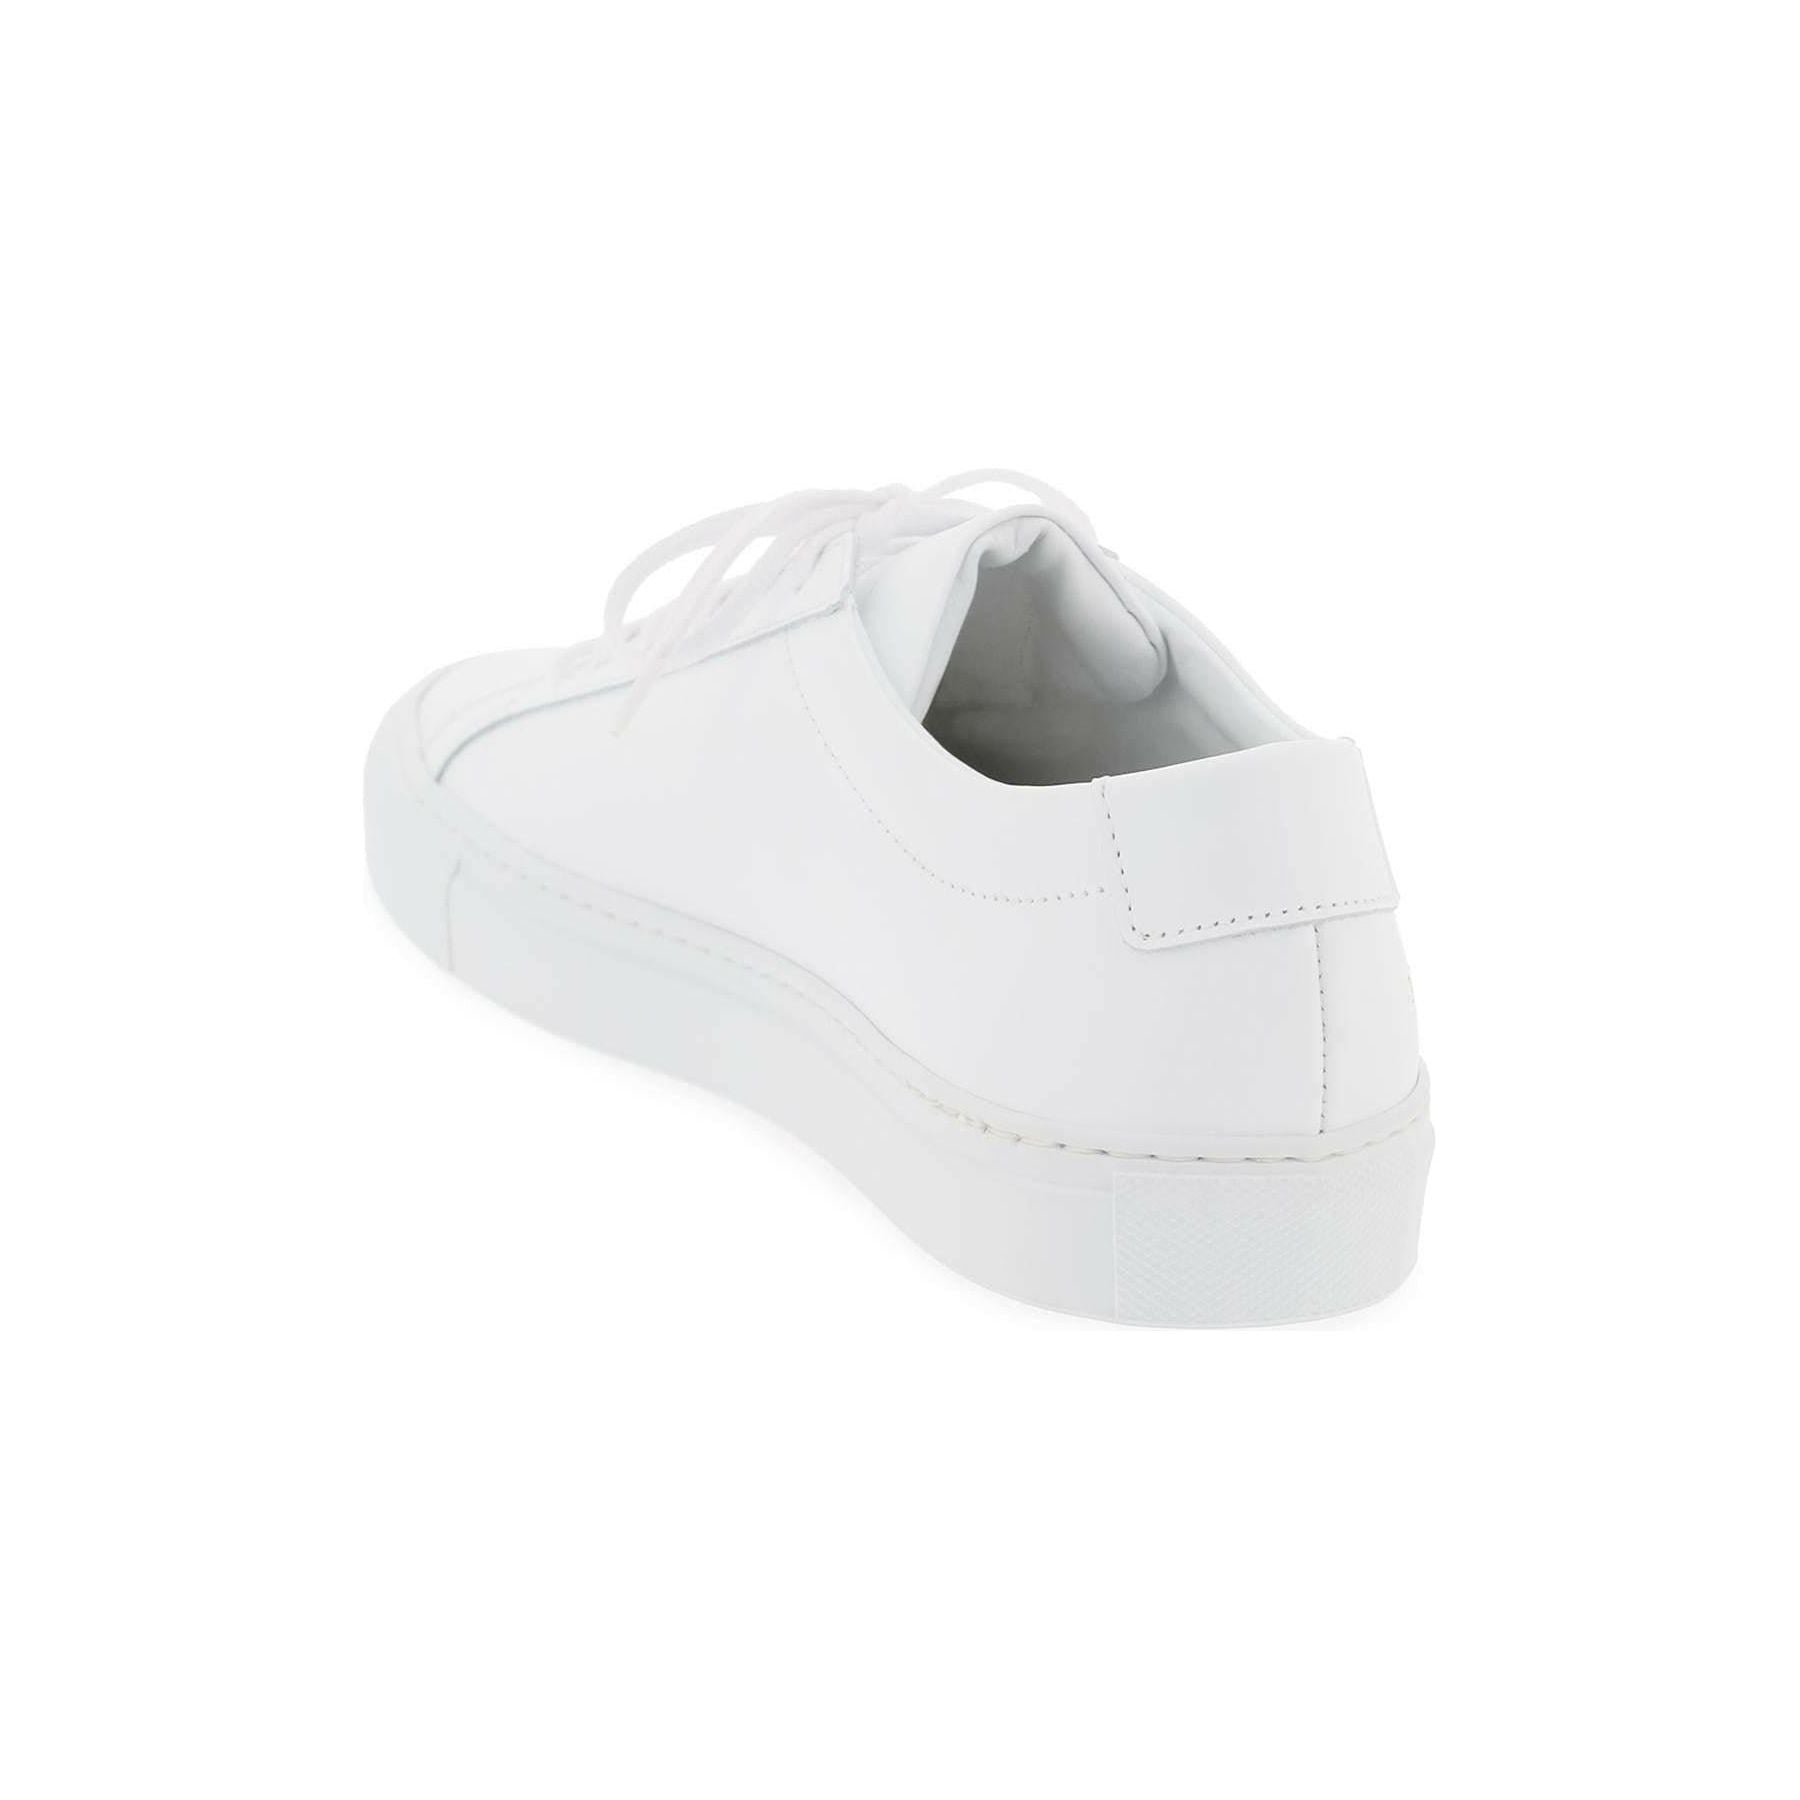 White Original Achilles Low-Top Leather Sneakers COMMON PROJECTS JOHN JULIA.